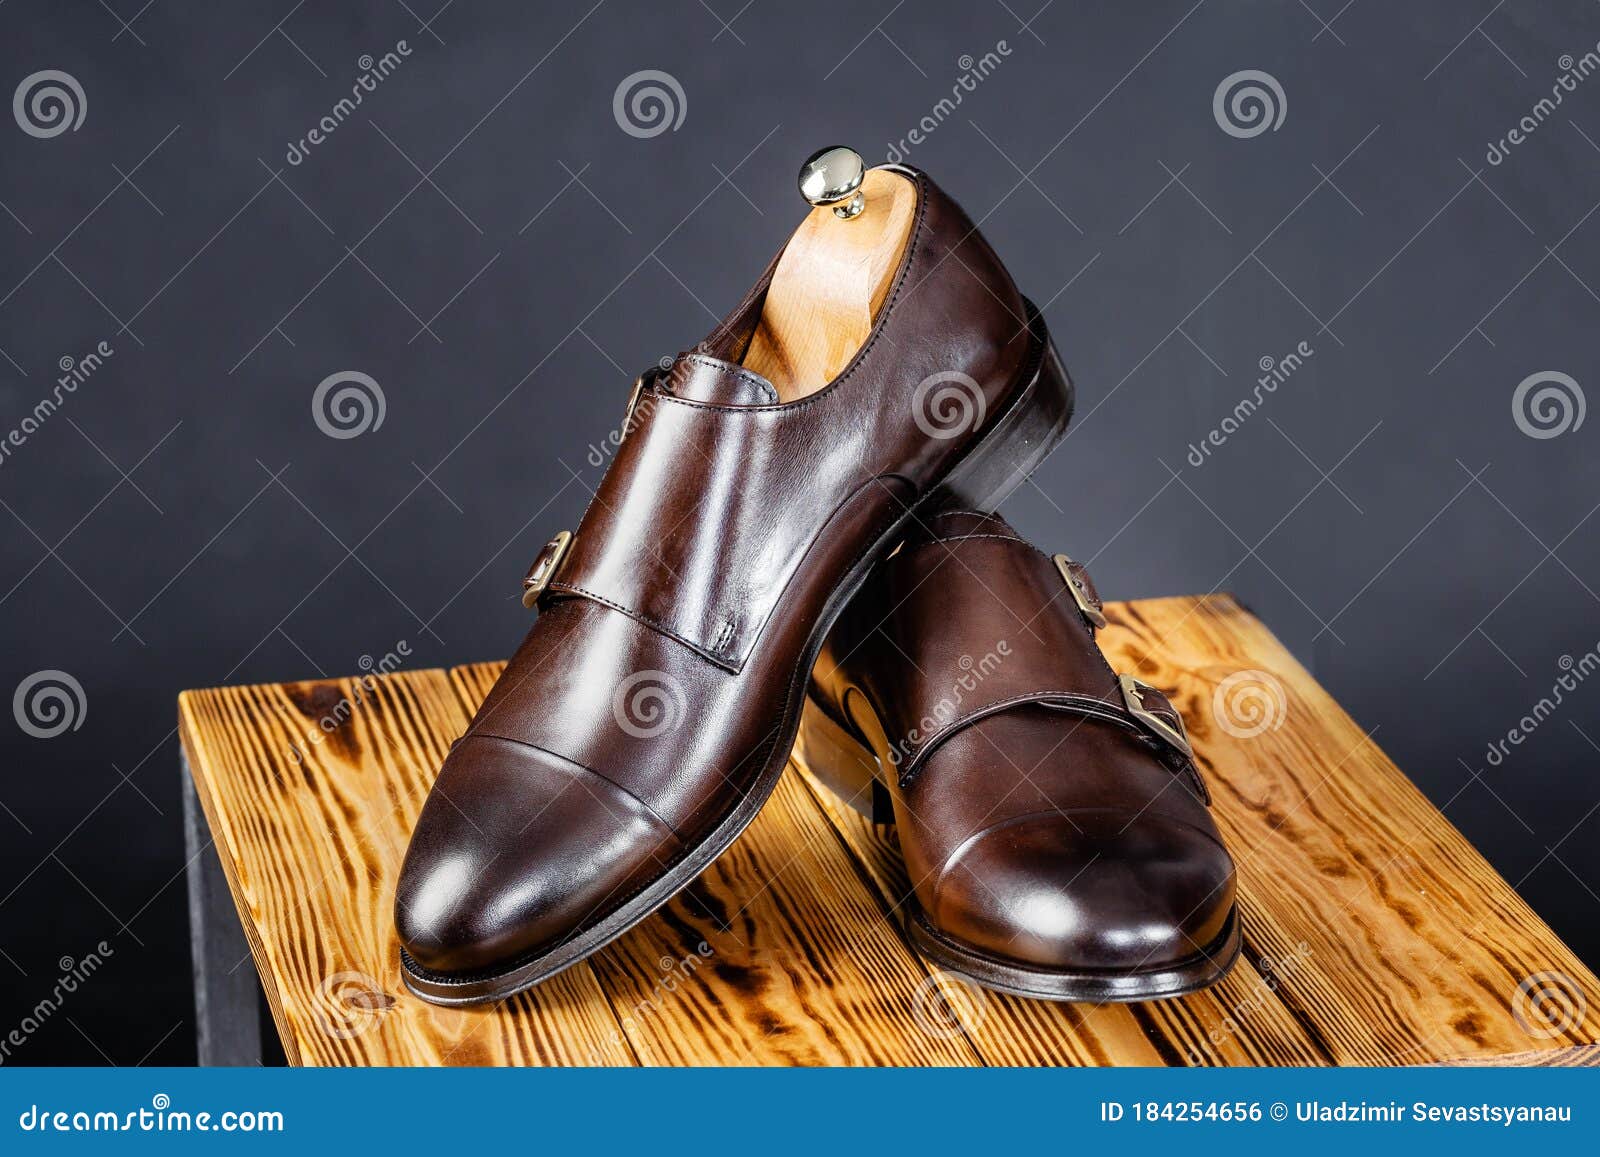 Stylish Leather Brown Shoes Against a Dark Background. Stock Photo ...